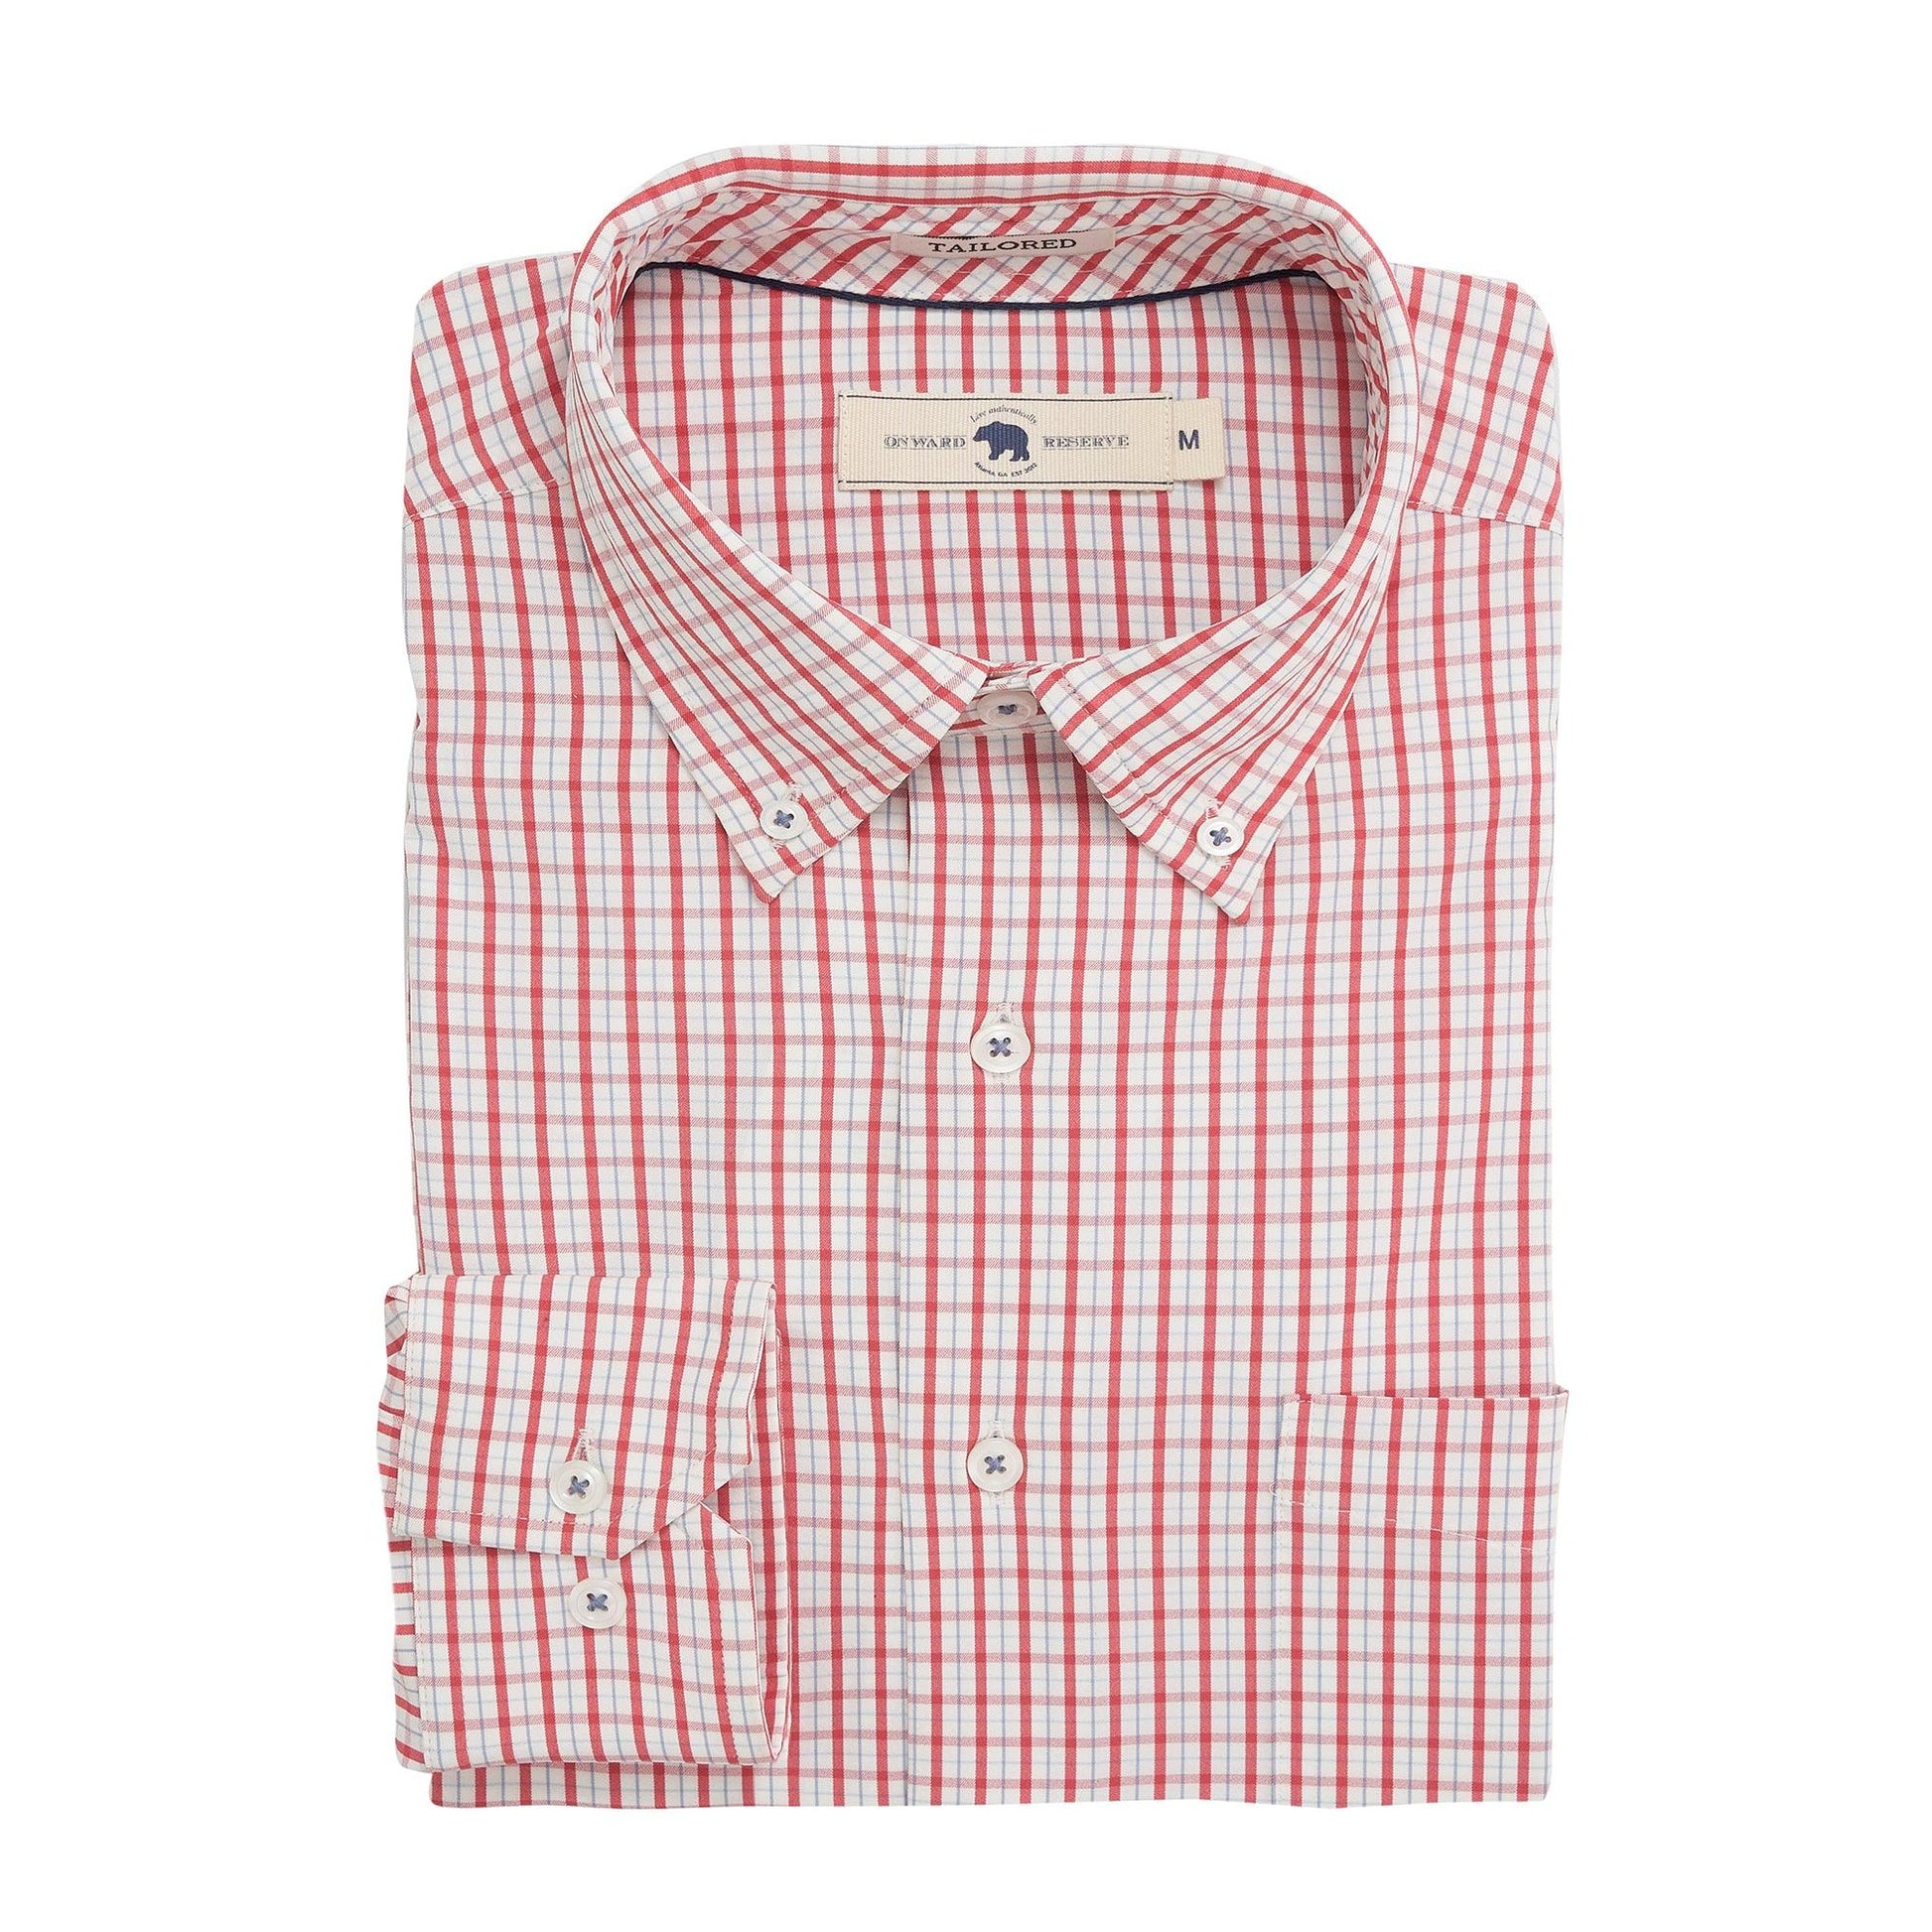 Hathcock Tailored Fit Performance Button Down - Onward Reserve